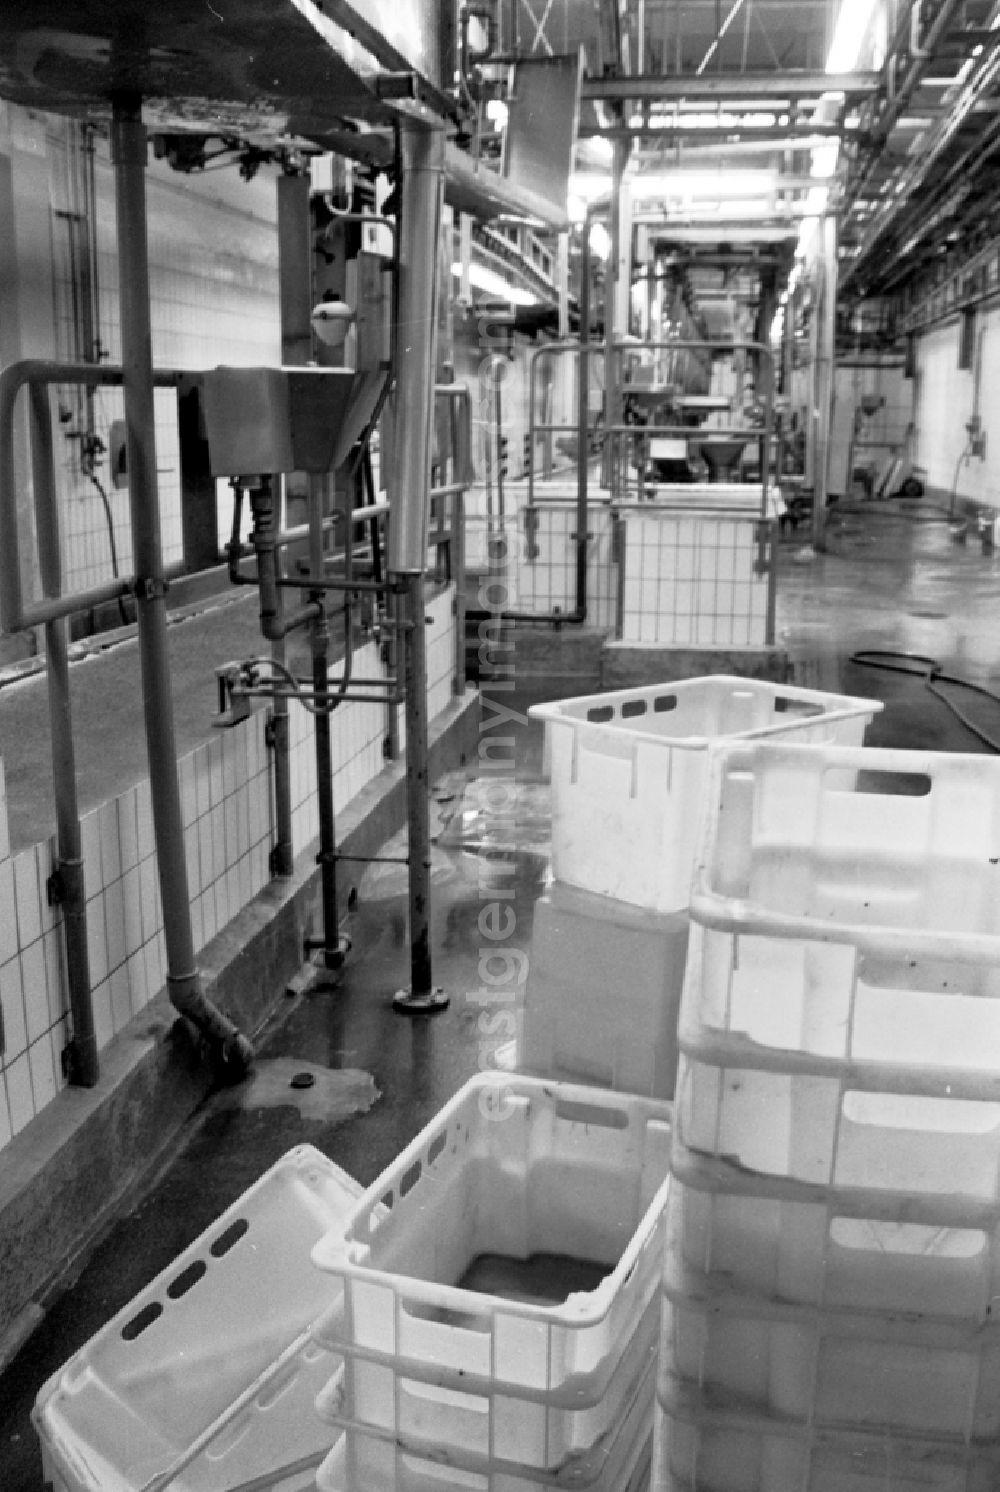 GDR picture archive: Britz - Production and processing facilities at the SVK Schlacht- und Verarbeitungskombinat Eberswalde slaughterhouse in Britz in the state Brandenburg on the territory of the former GDR, German Democratic Republic